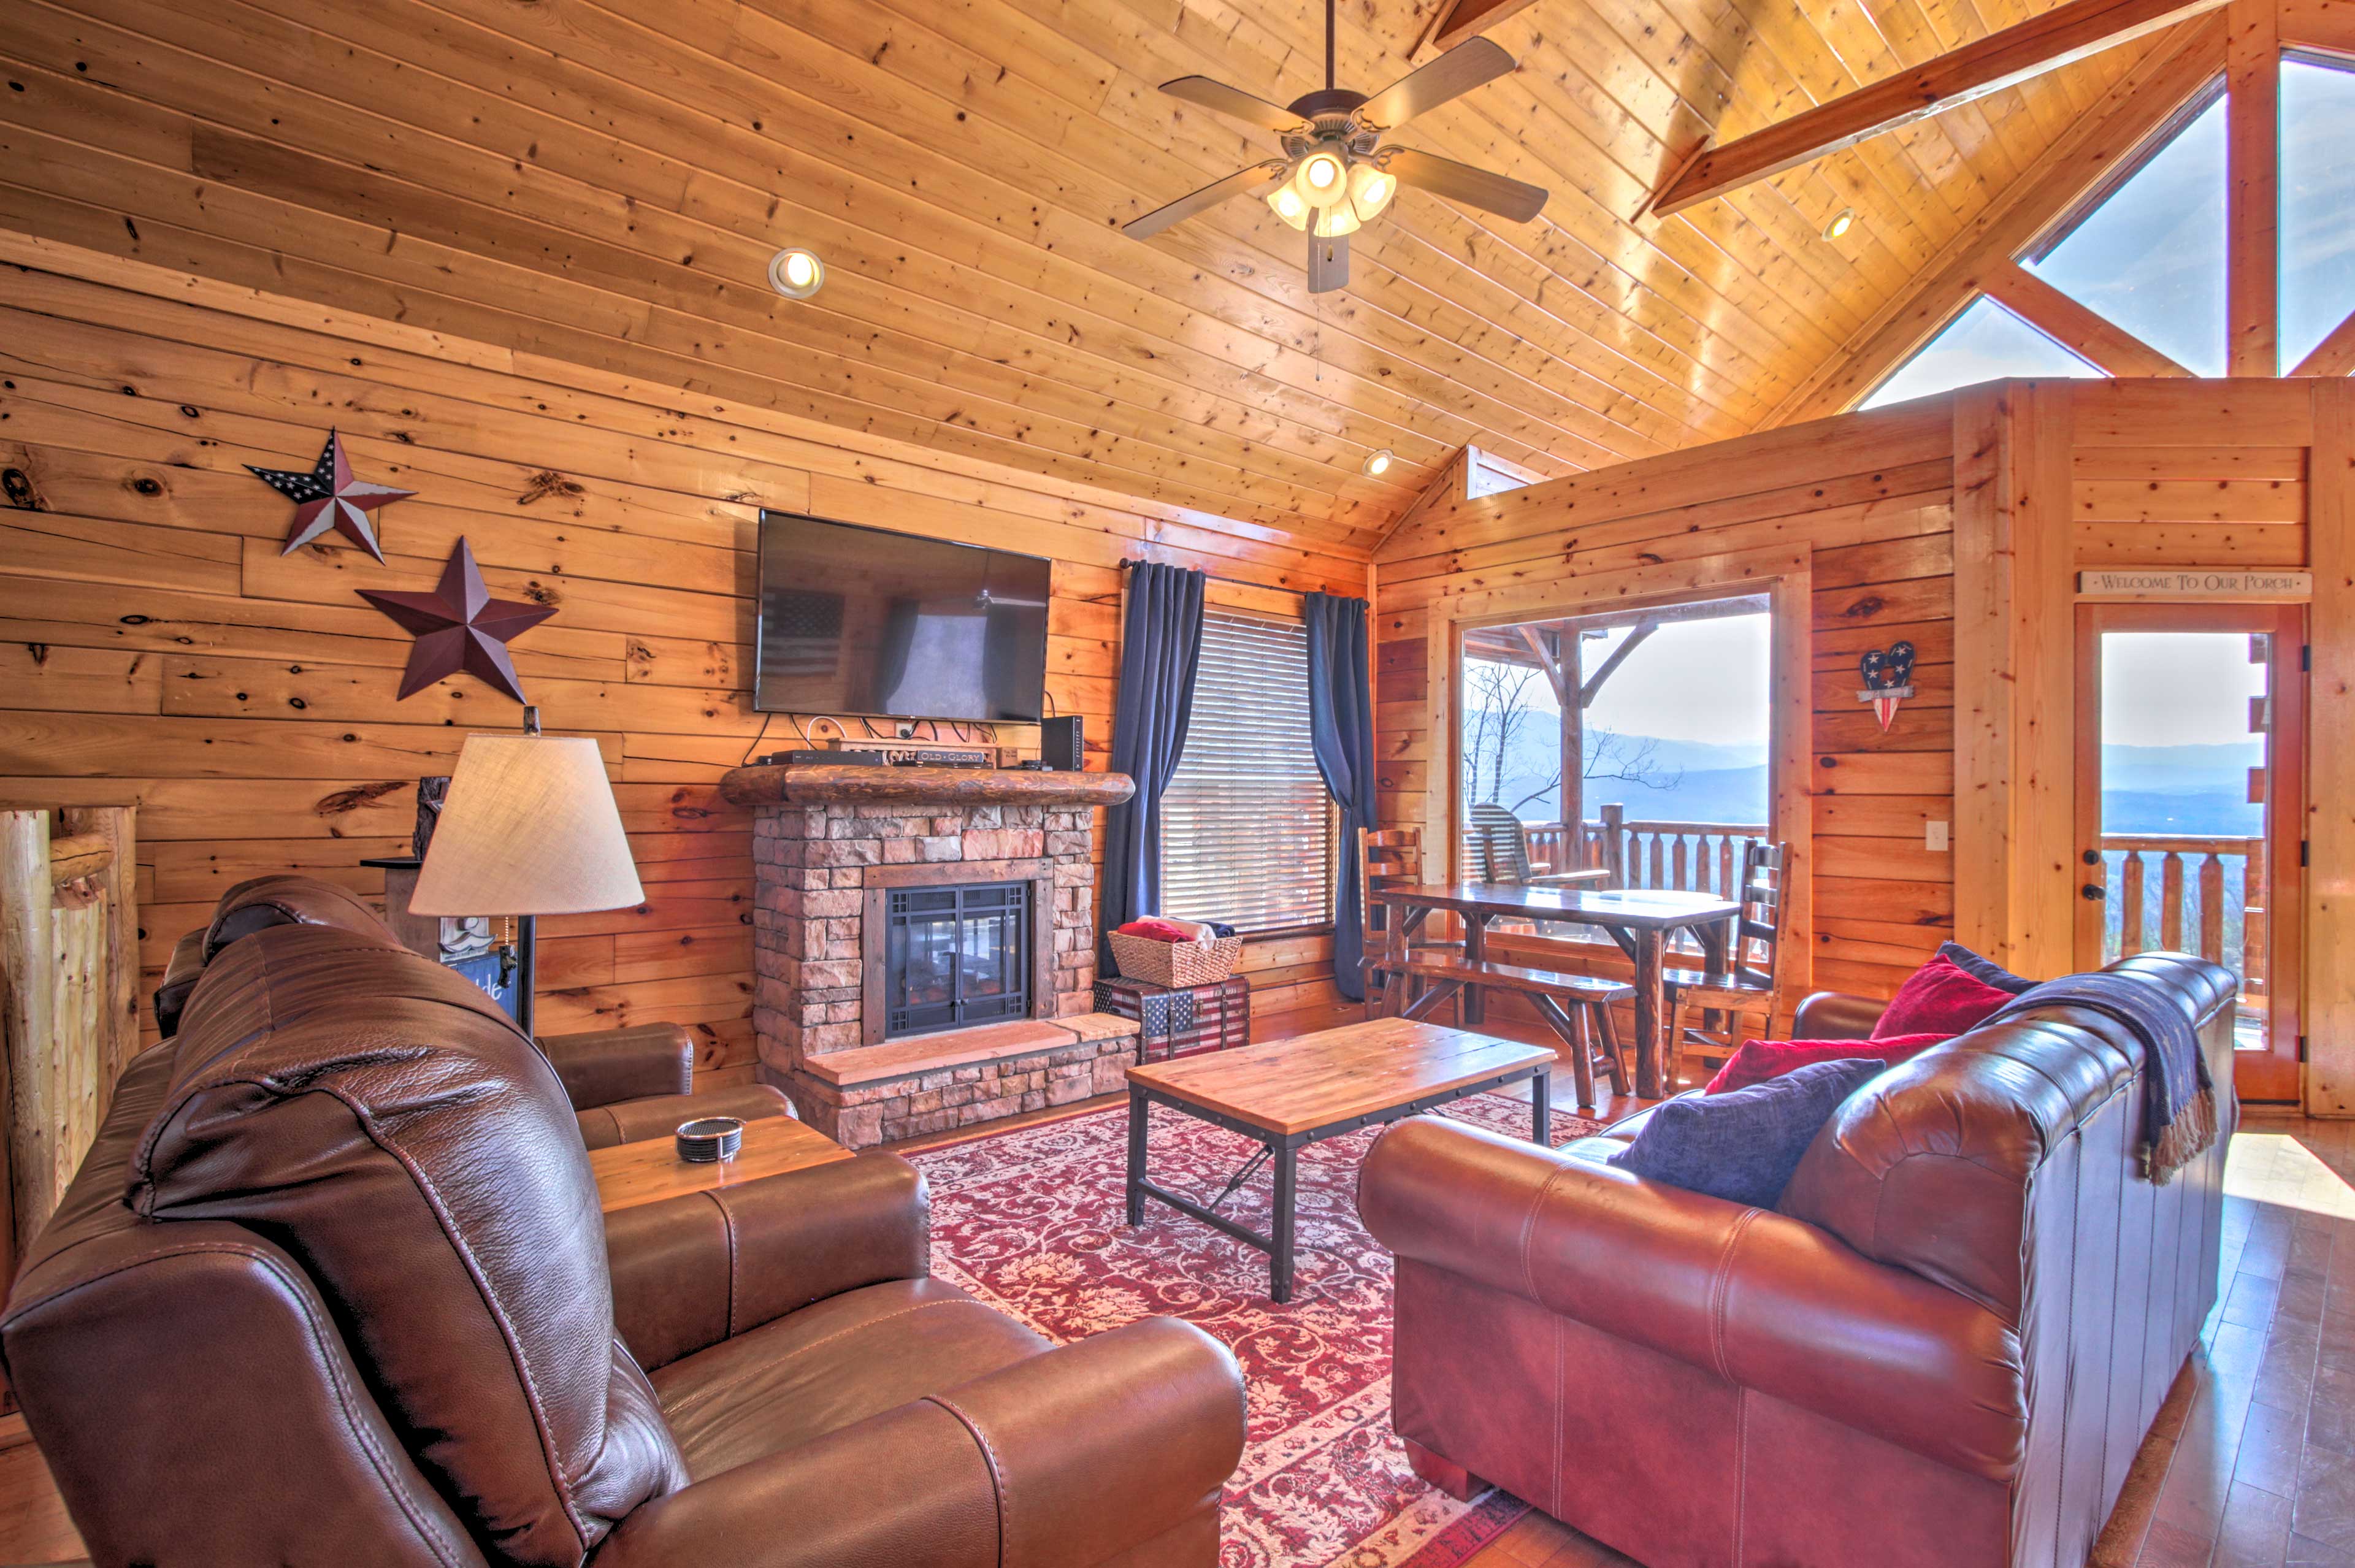 Property Image 1 - Pigeon Forge Mountain Cabin: Hot Tub & Resort Pool